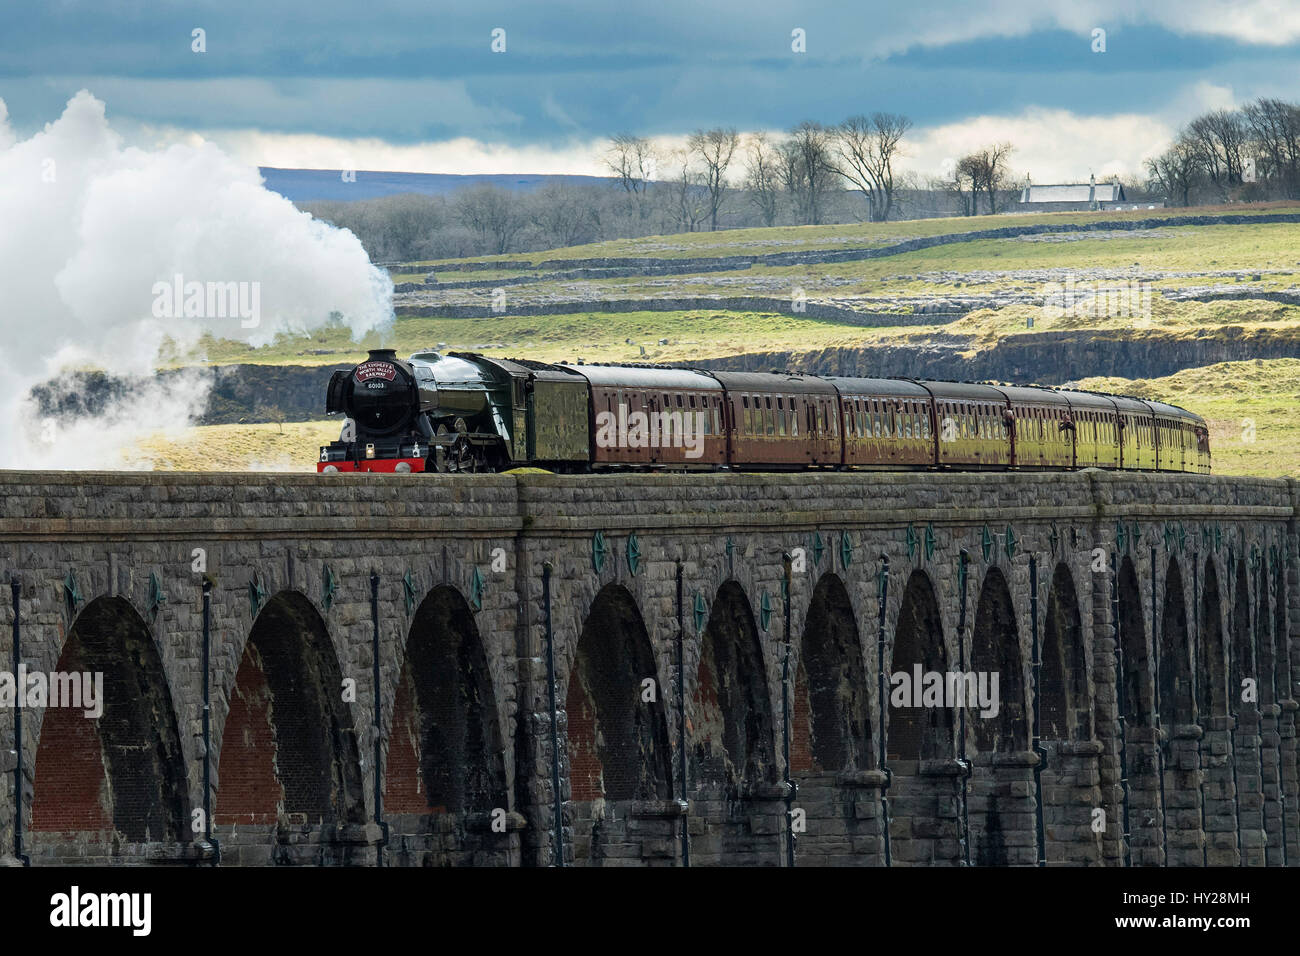 Ribblehead, North Yorkshire, UK. 31st March 2017. The iconic steam locomotive LNER class A3 60103 Flying Scotsman, travels over the Ribblehead Viaduct. The train is travelling this route, taking part in the celebrations marking  the re-opening of the Settle Carlisle line. Credit: Ian Lamond/Alamy Live News Stock Photo